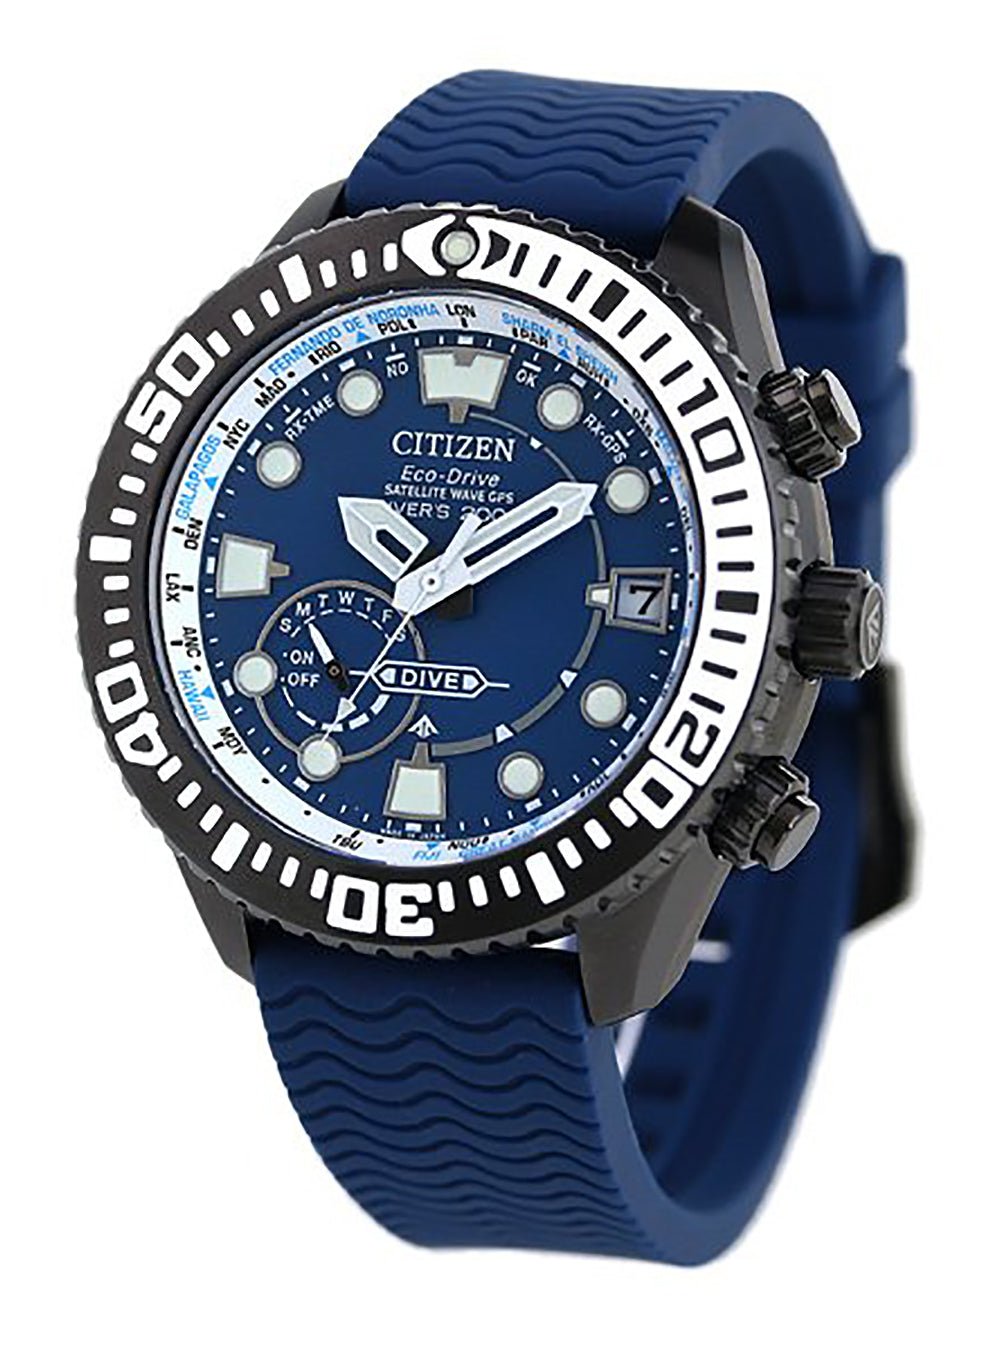 GPS | in – CC5006-06L Made Citizen Watch Dive Promaster japan-select Japan